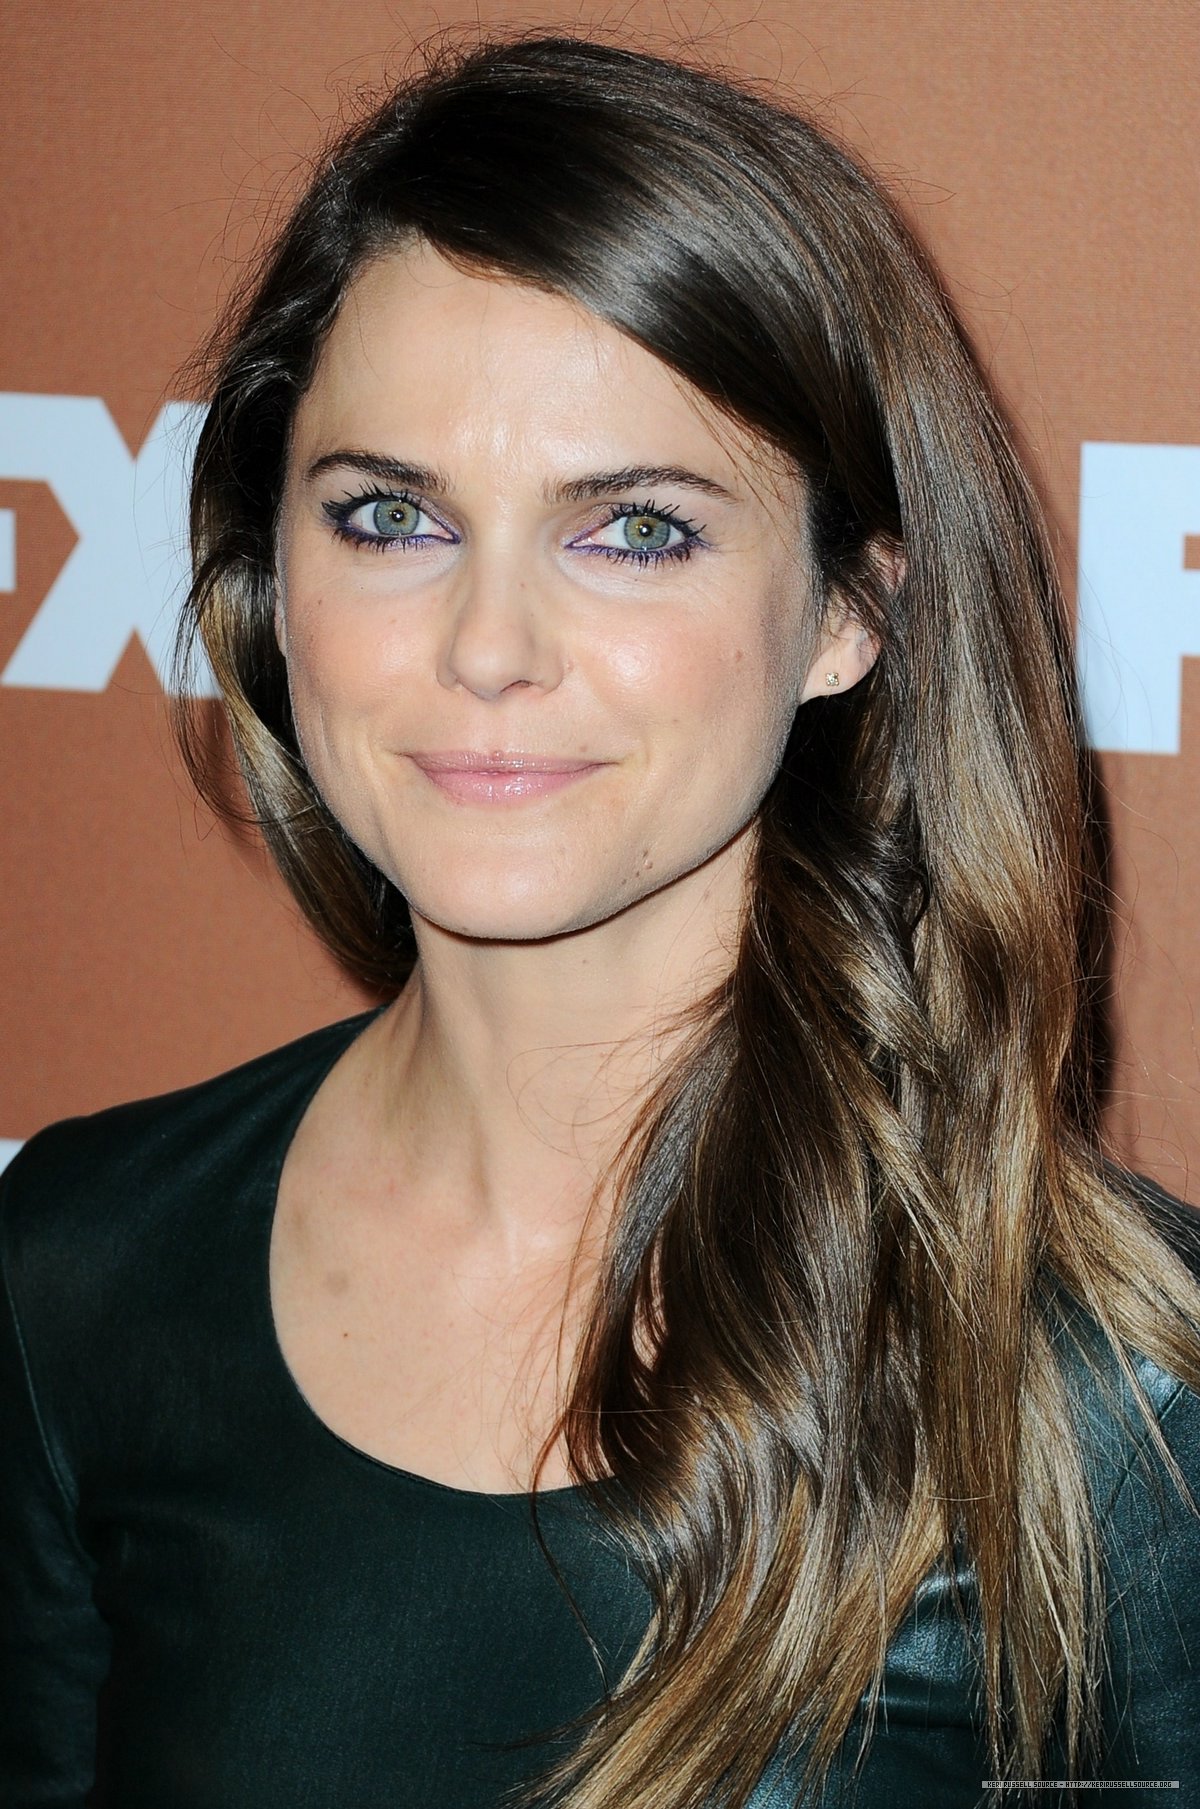 Keri Russell attends 2013 FX Upfront Bowling Event